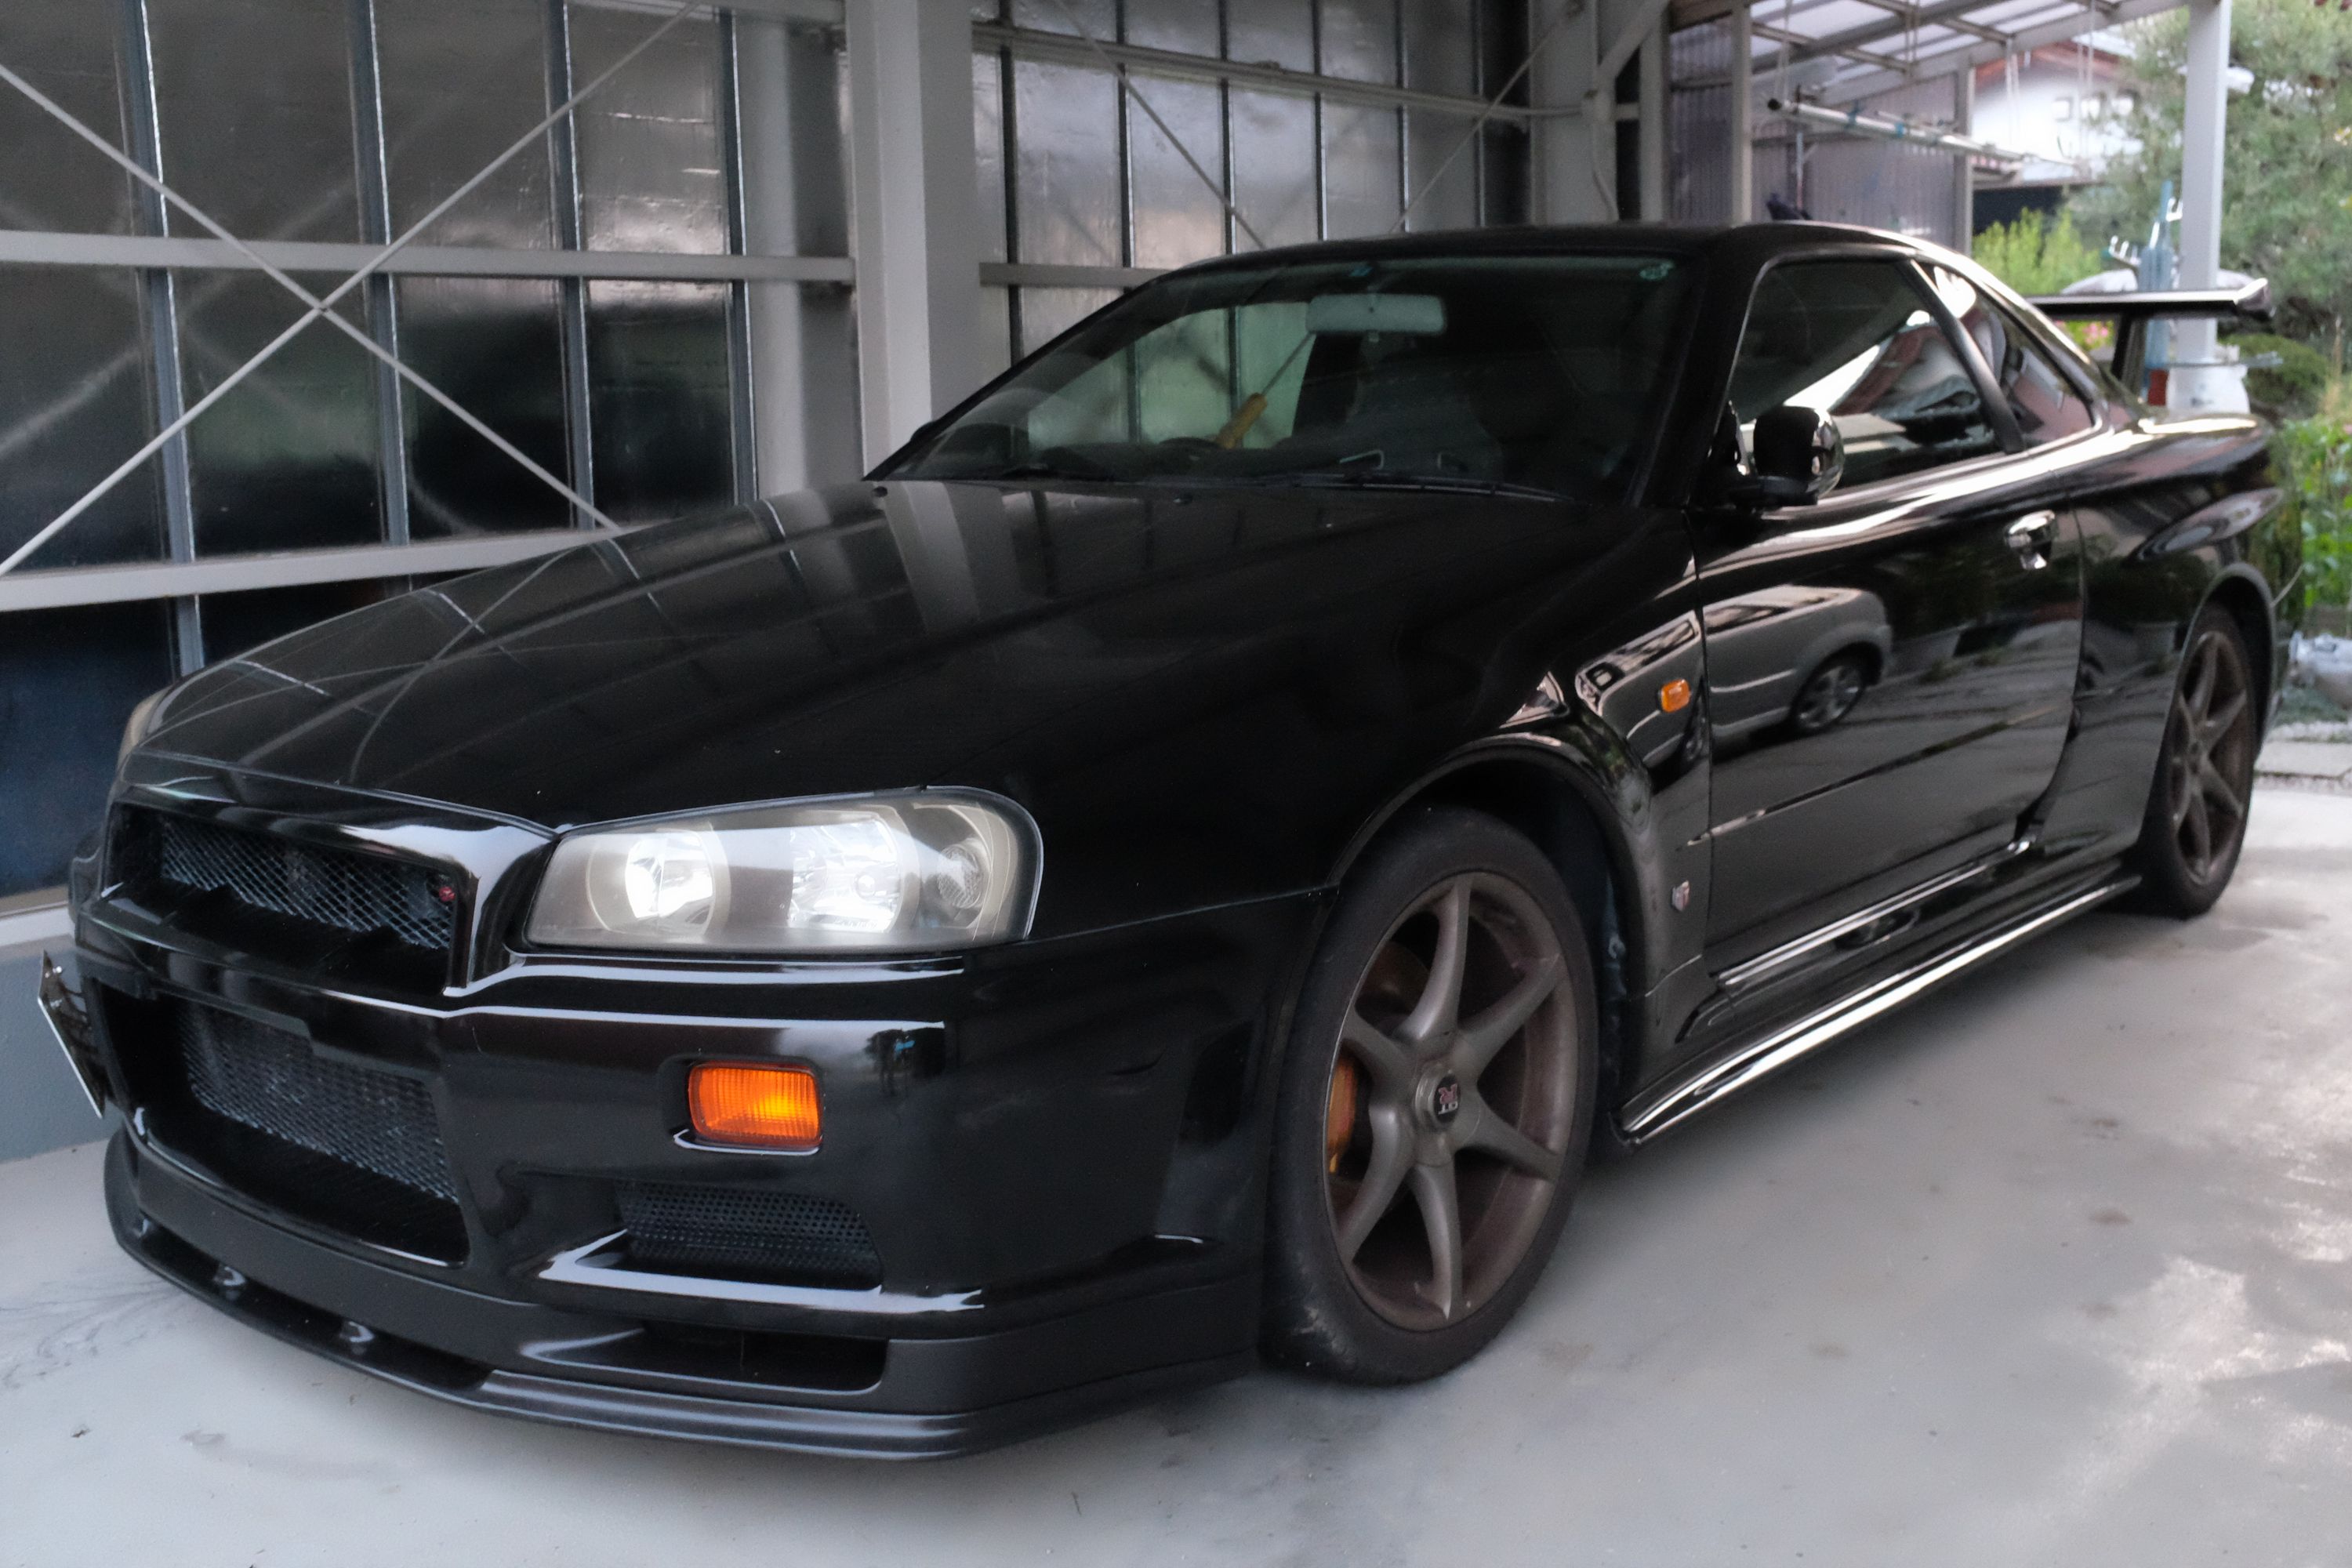 A menacing-looking black Nissan Skyline R34 with a big wing and custom bodywork.